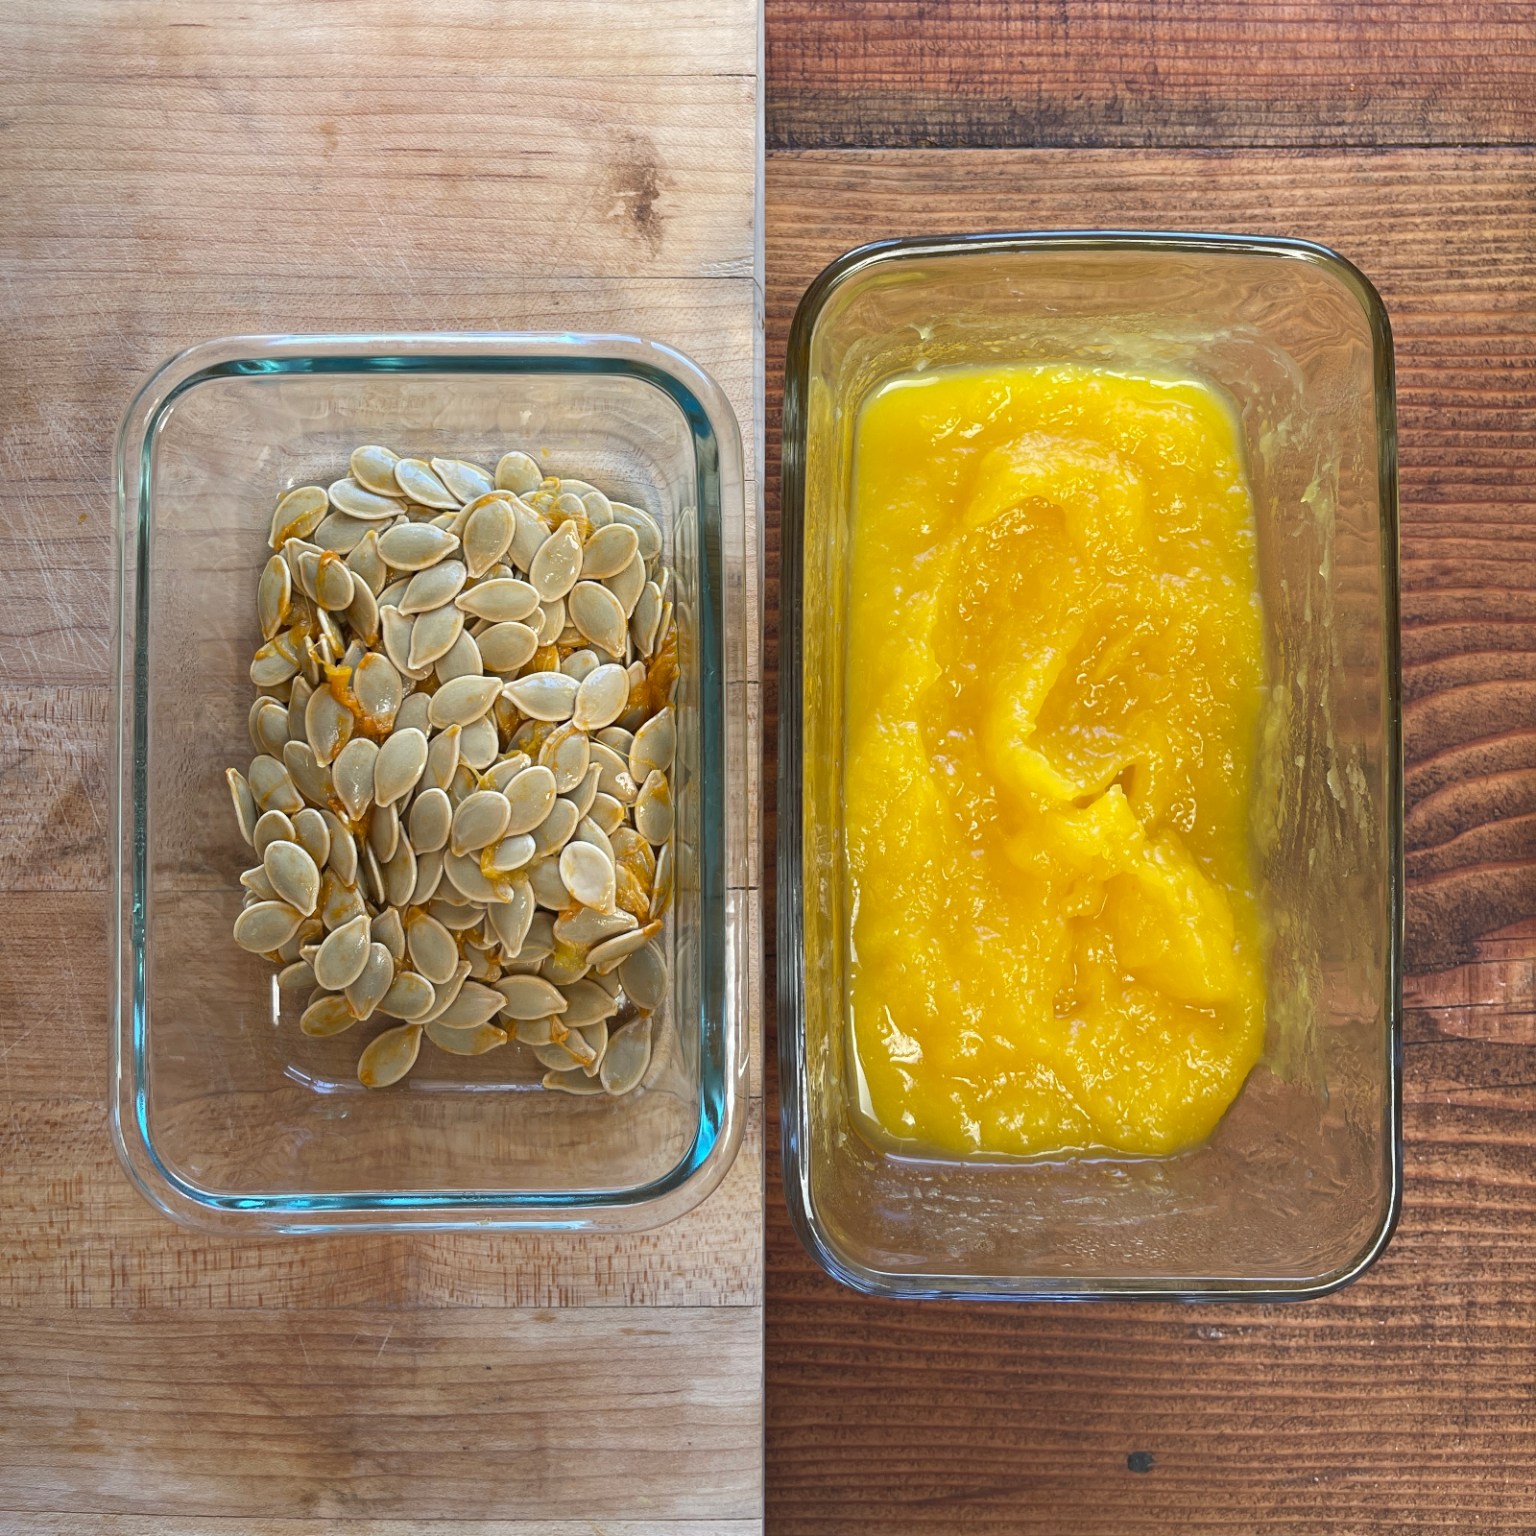 A glass dish of raw pumpkin seeds sits to the left of a glass dish of pumpkin purée